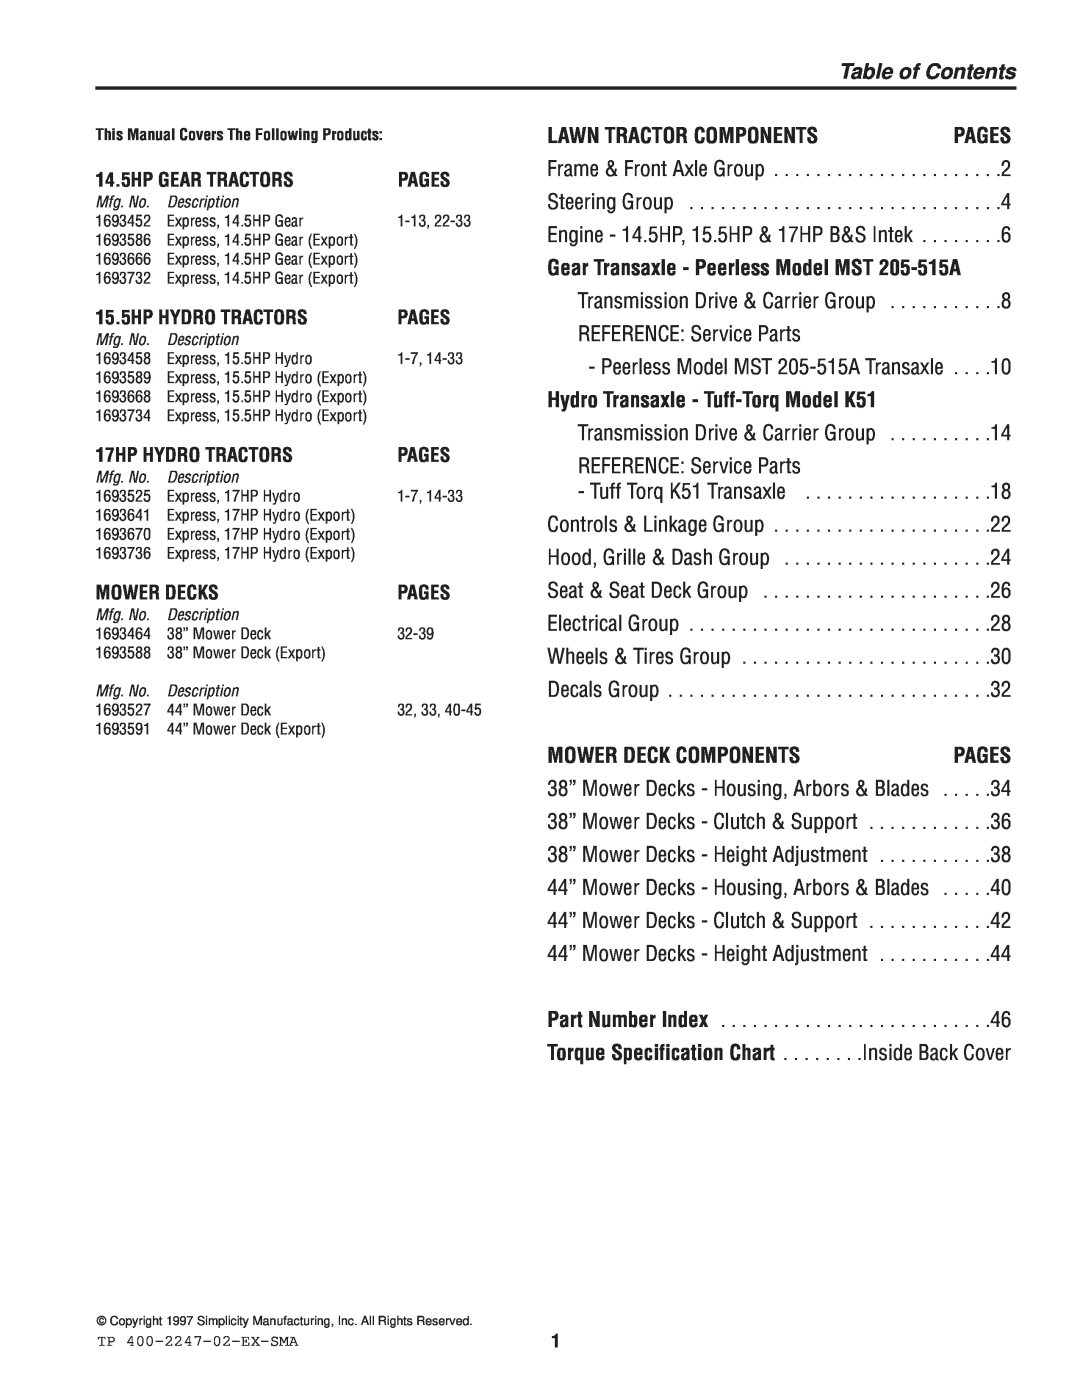 Simplicity Express Series Table of Contents, Lawn Tractor Components, Gear Transaxle - Peerless Model MST 205-515A, Pages 